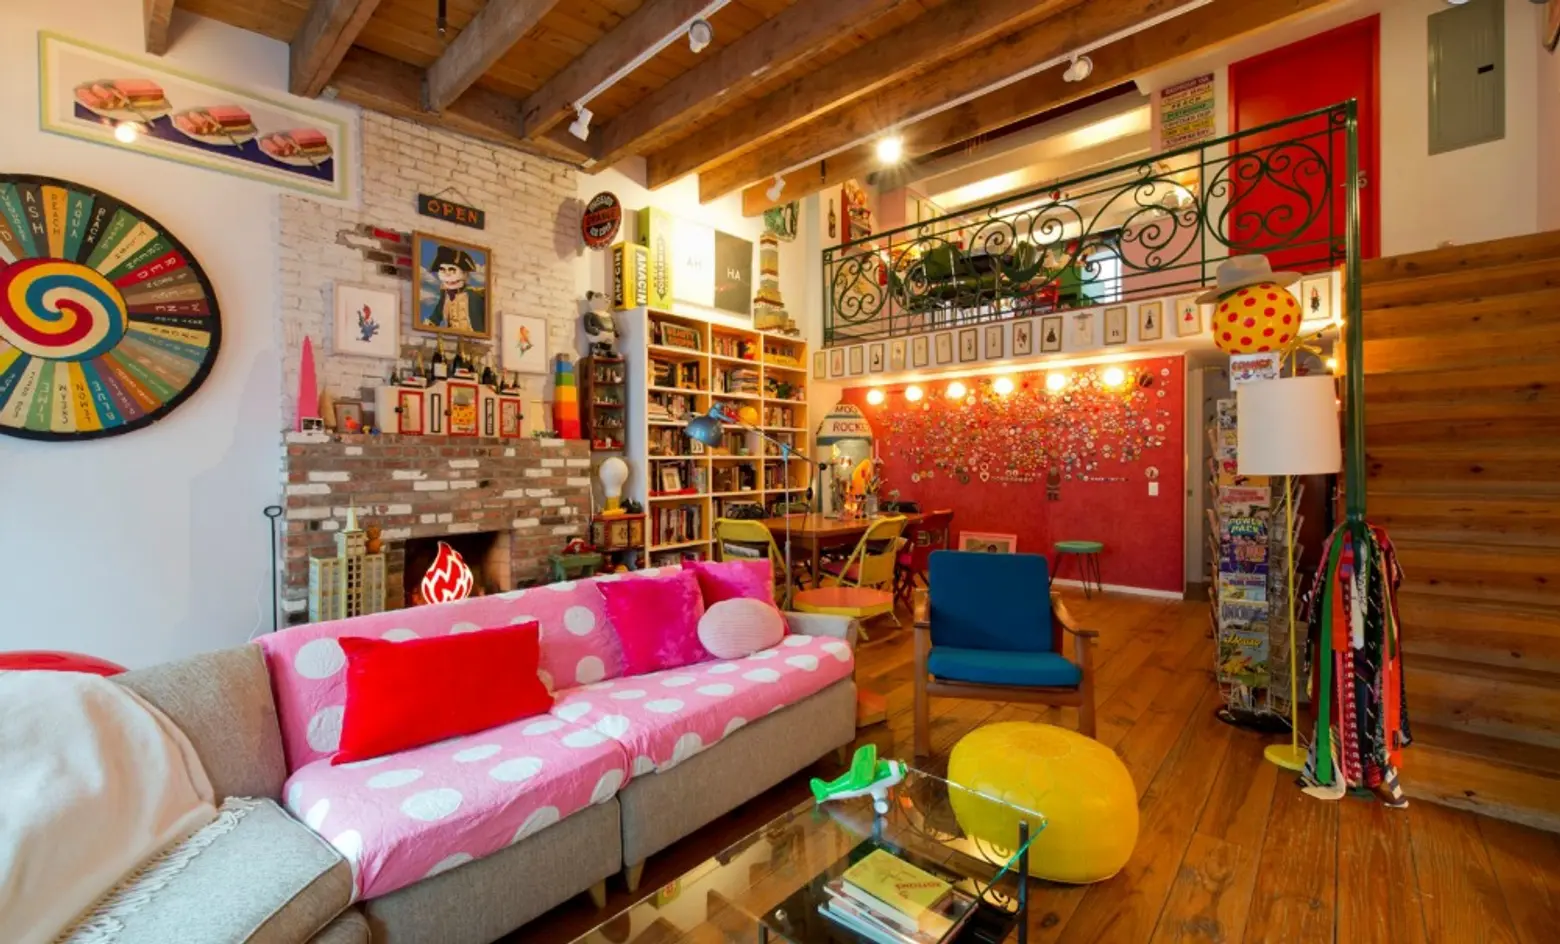 Let Your Imagination Run Wild in This Wacky $8.3M East Village Home